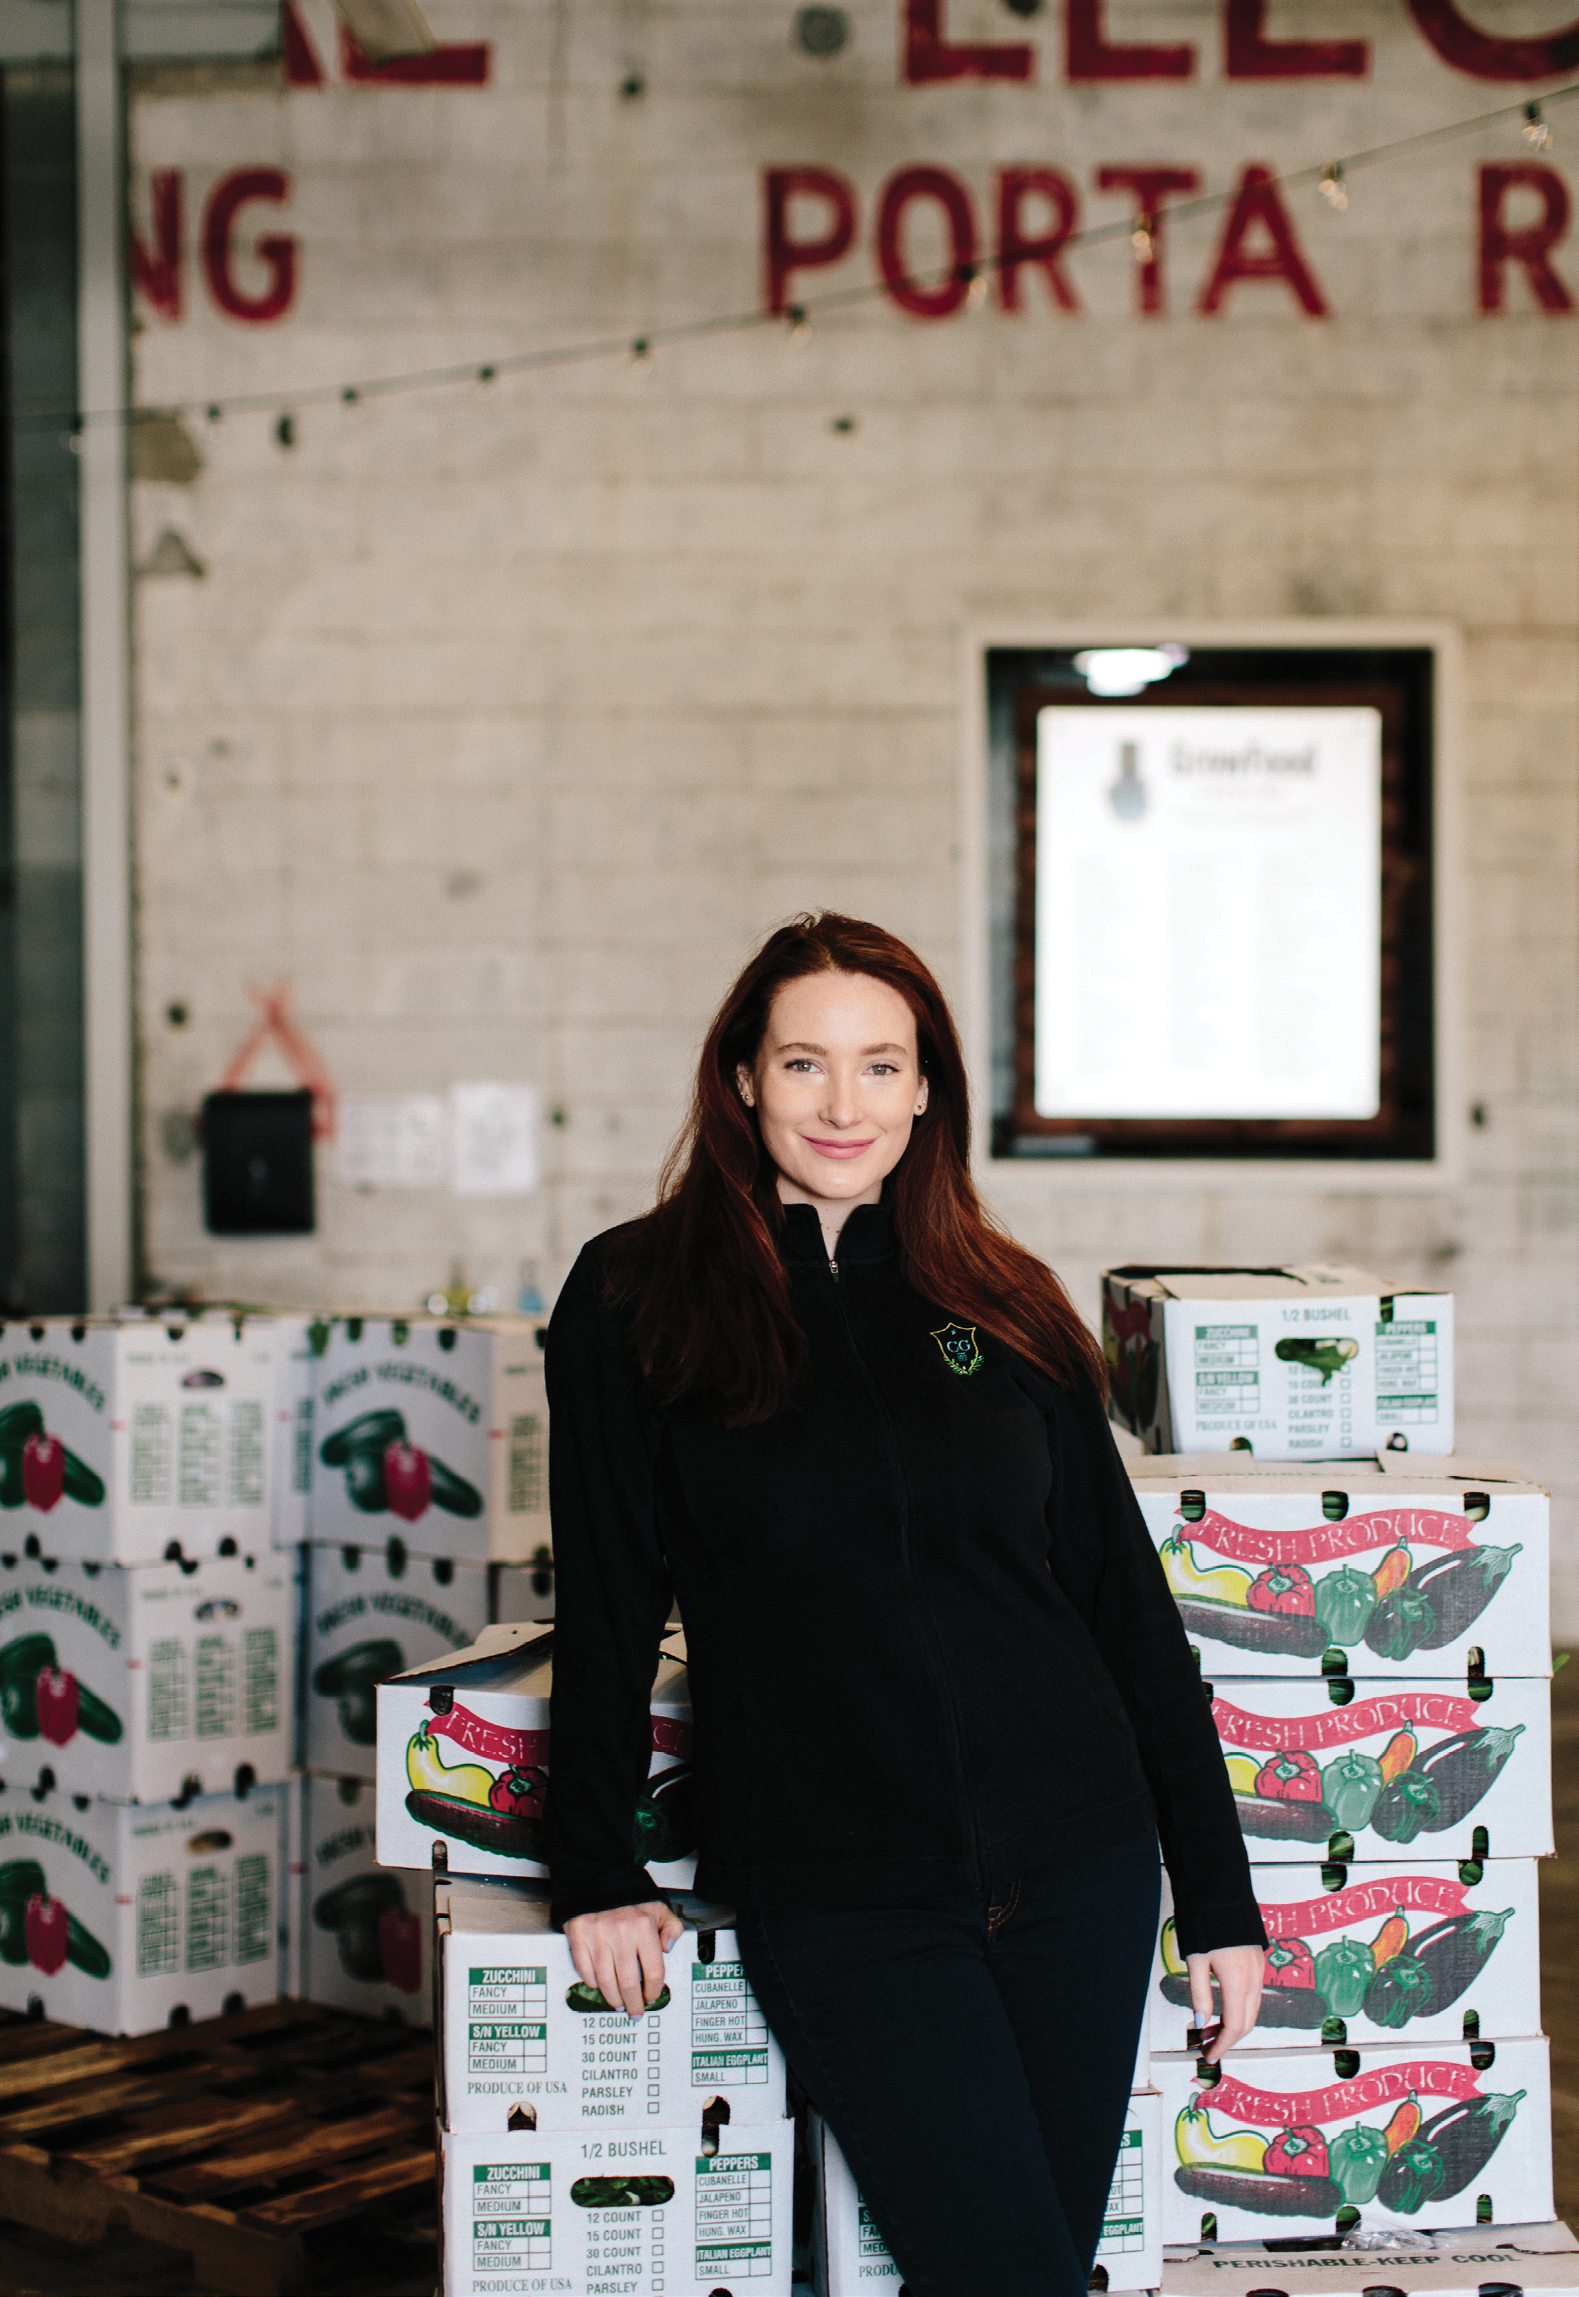 “GrowFood makes buying produce easy—lots of unique items and staples, all local. Right now, I’m loving their baby turnips and different types of kale.” —Amalia Scatena, Cannon Green